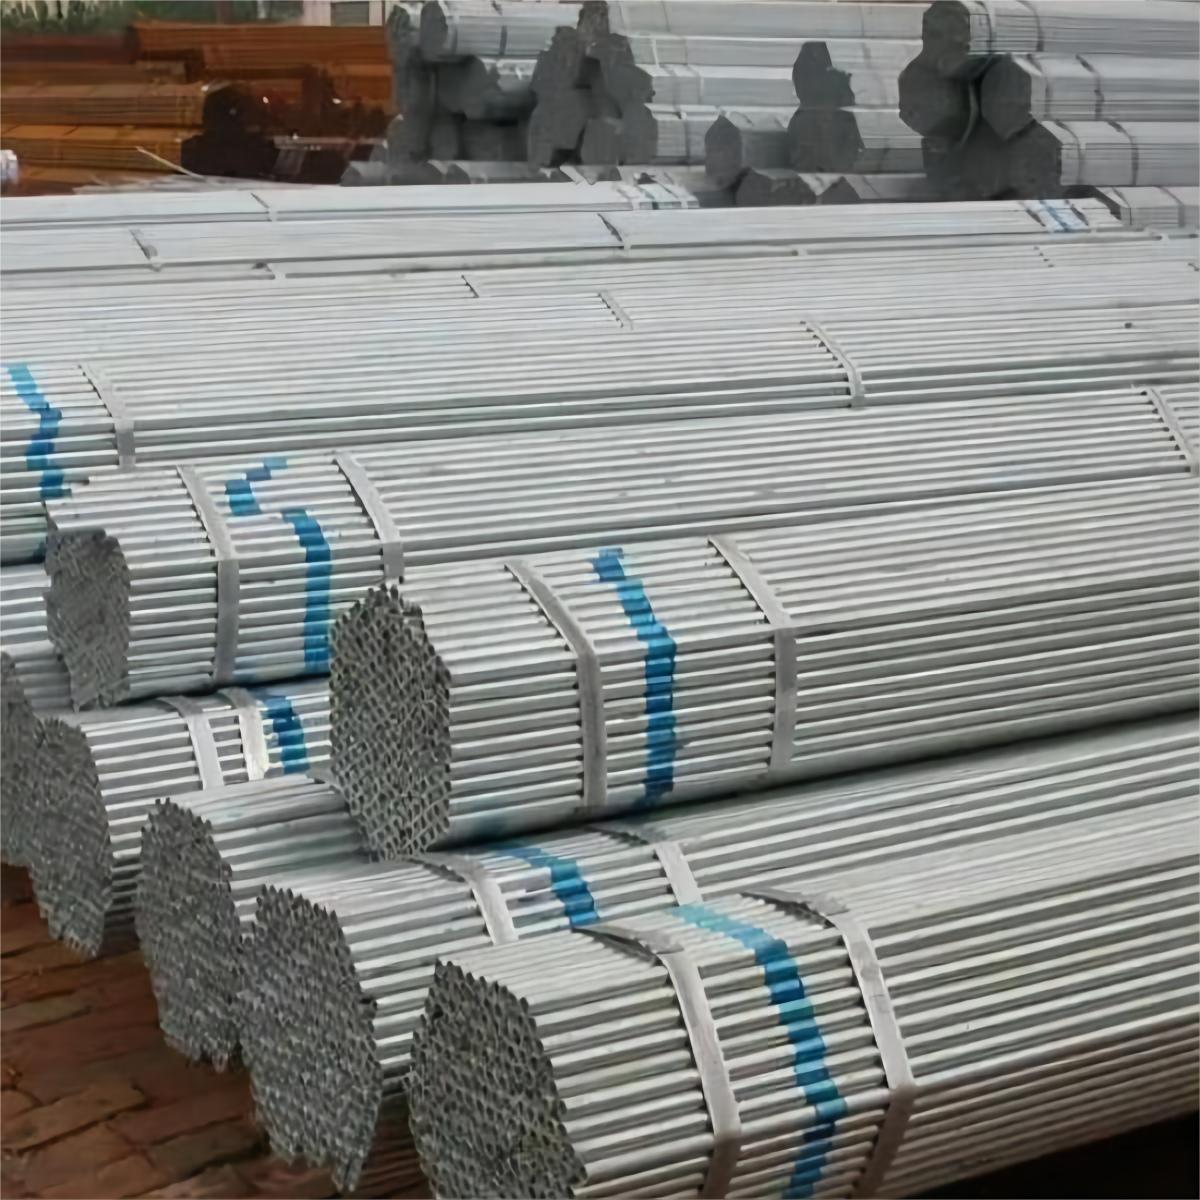 China Gold Supplier For Galvanised Zinc Sheet - Theoretical Knowledge of Galvanized Pipe In Greenhouse – XINXIN PENGYUAN